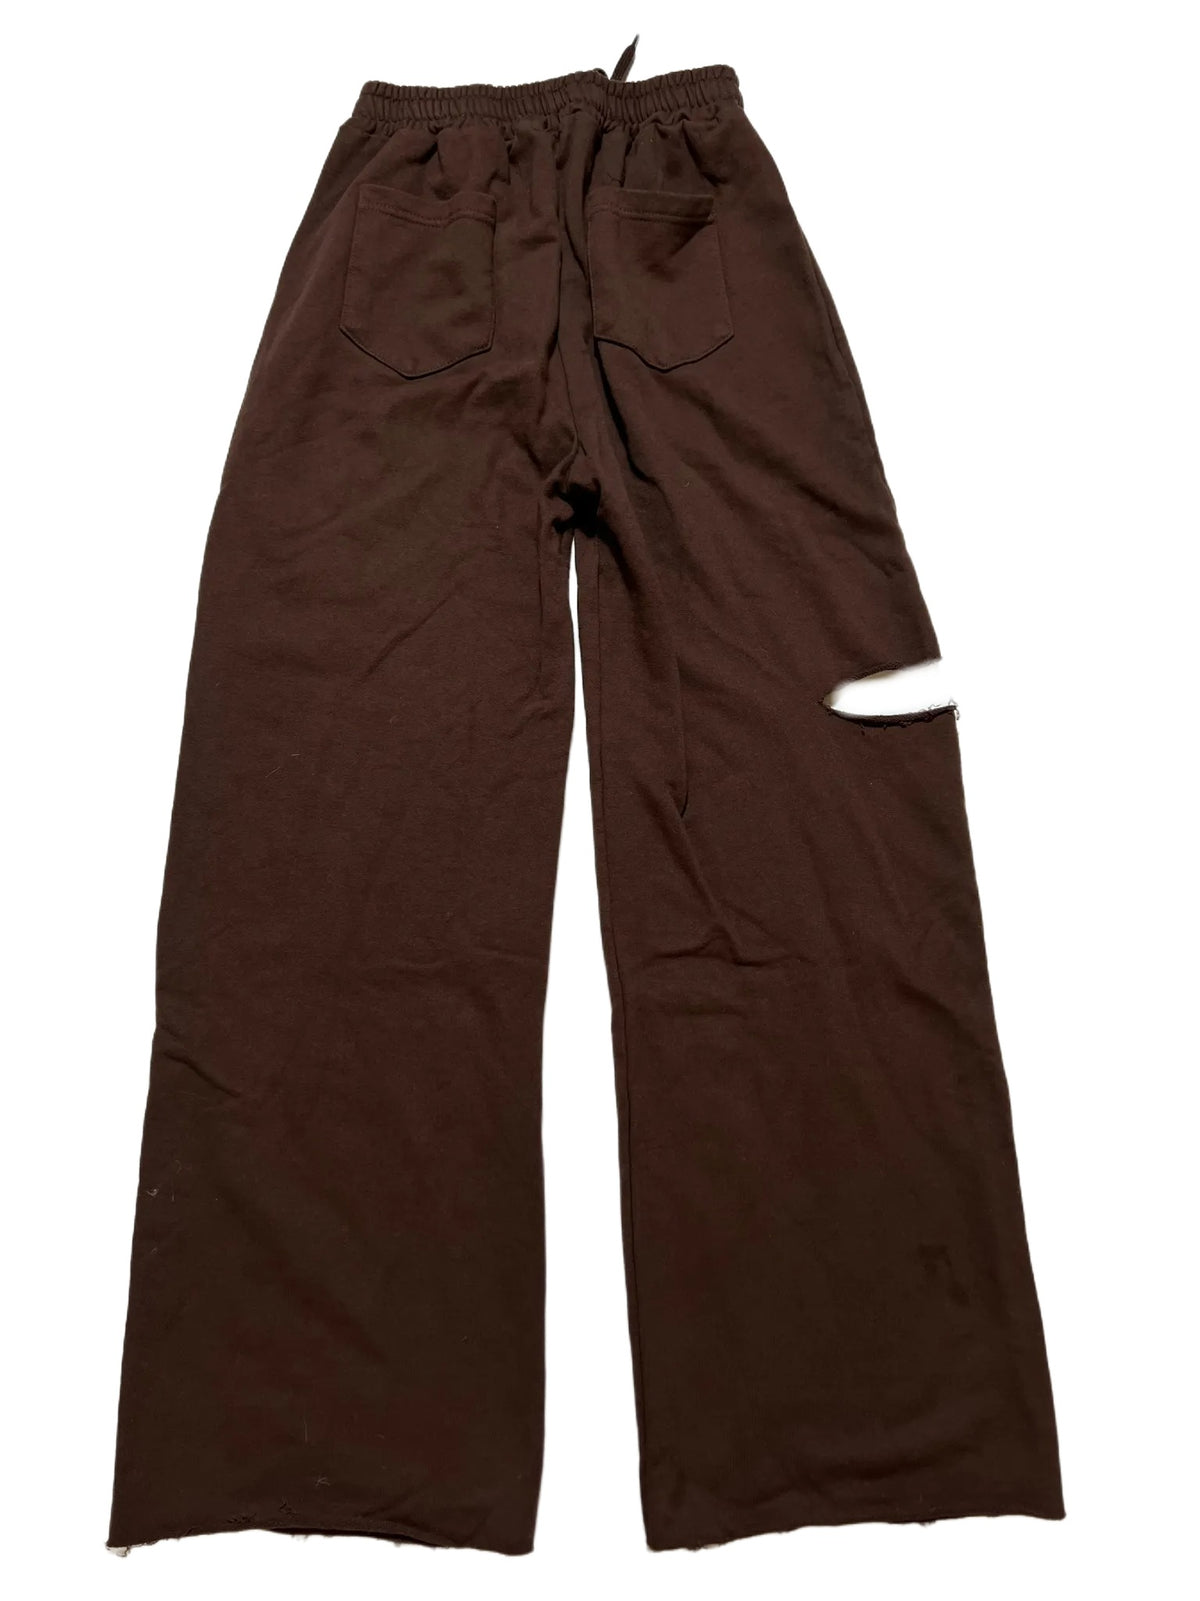 Storets- Brown Ripped Sweat Pants